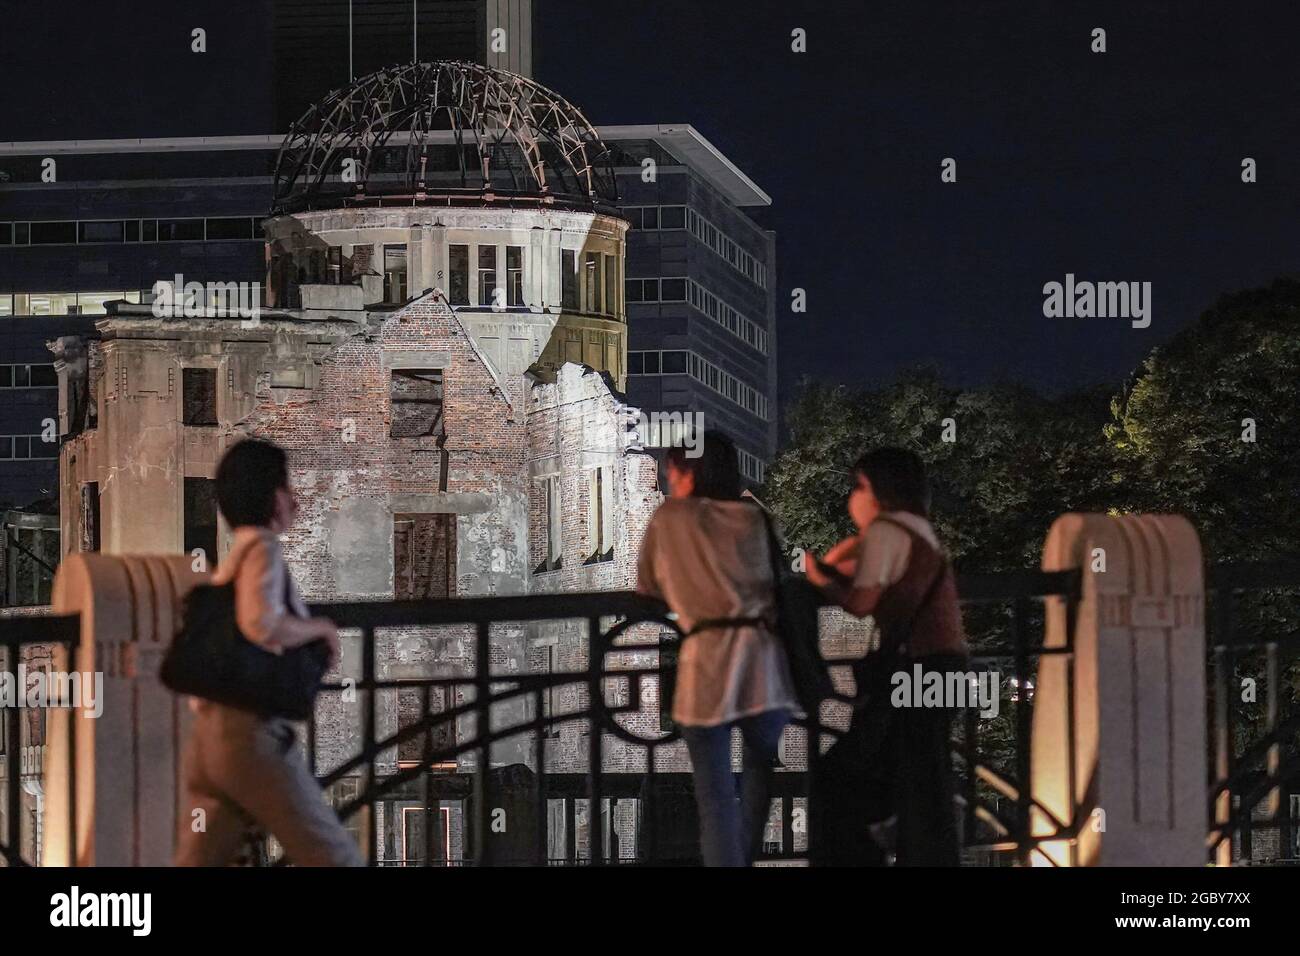 Hiroshima, Japan. 05th Aug, 2021. People look at the Atomic Bomb Dome that lights up at night.This Friday will mark the 76th anniversary of the atomic bombing of Hiroshima, which killed about 150,000 people and destroyed the entire city for the first bombing with a nuclear weapon in war. Limited guests and Japan's dignitaries including Prime Minister Yoshihide Suga will attend the Peace Memorial Ceremony amid the coronavirus pandemic. Credit: SOPA Images Limited/Alamy Live News Stock Photo